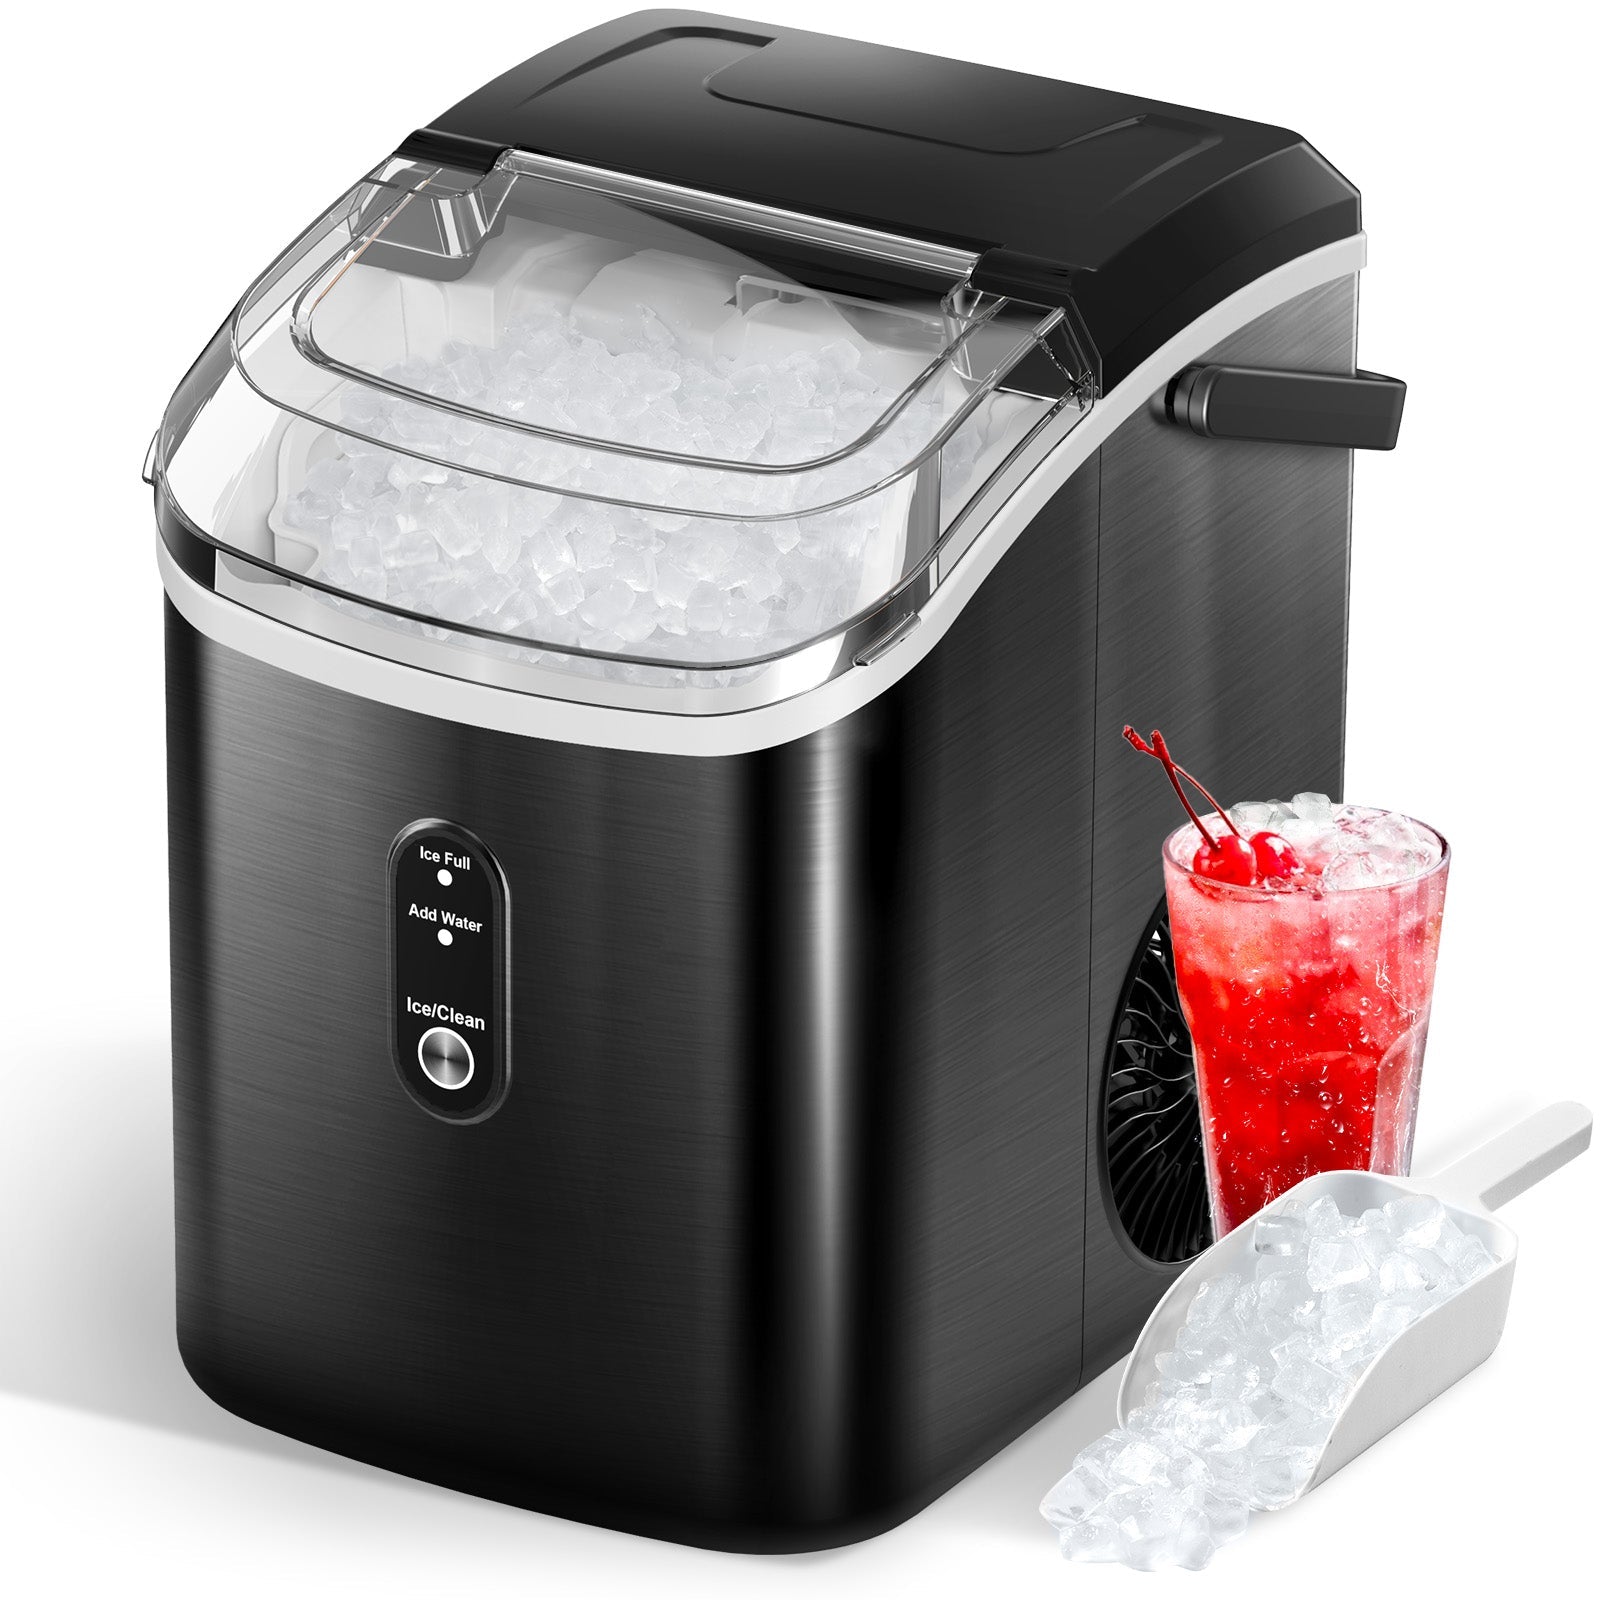 Dreamice X3 Nugget Ice Maker Machine, Countertop, Chewable Sonic